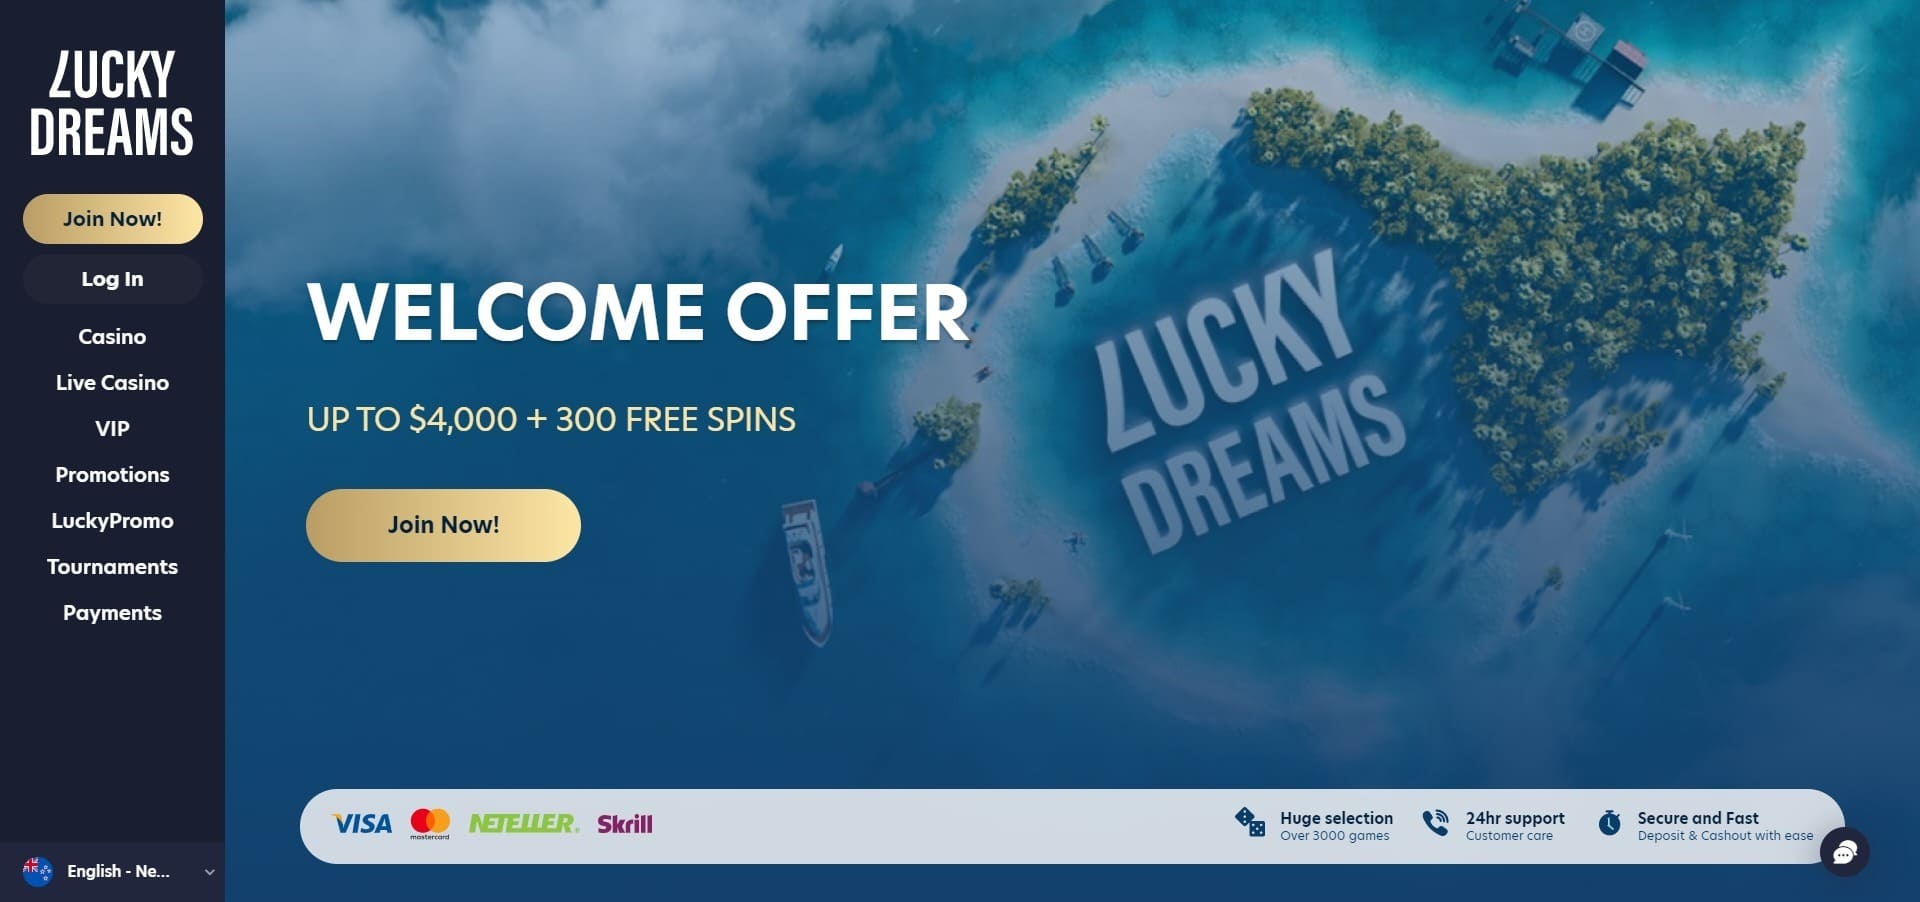 Official website of the Lucky Dreams Casino